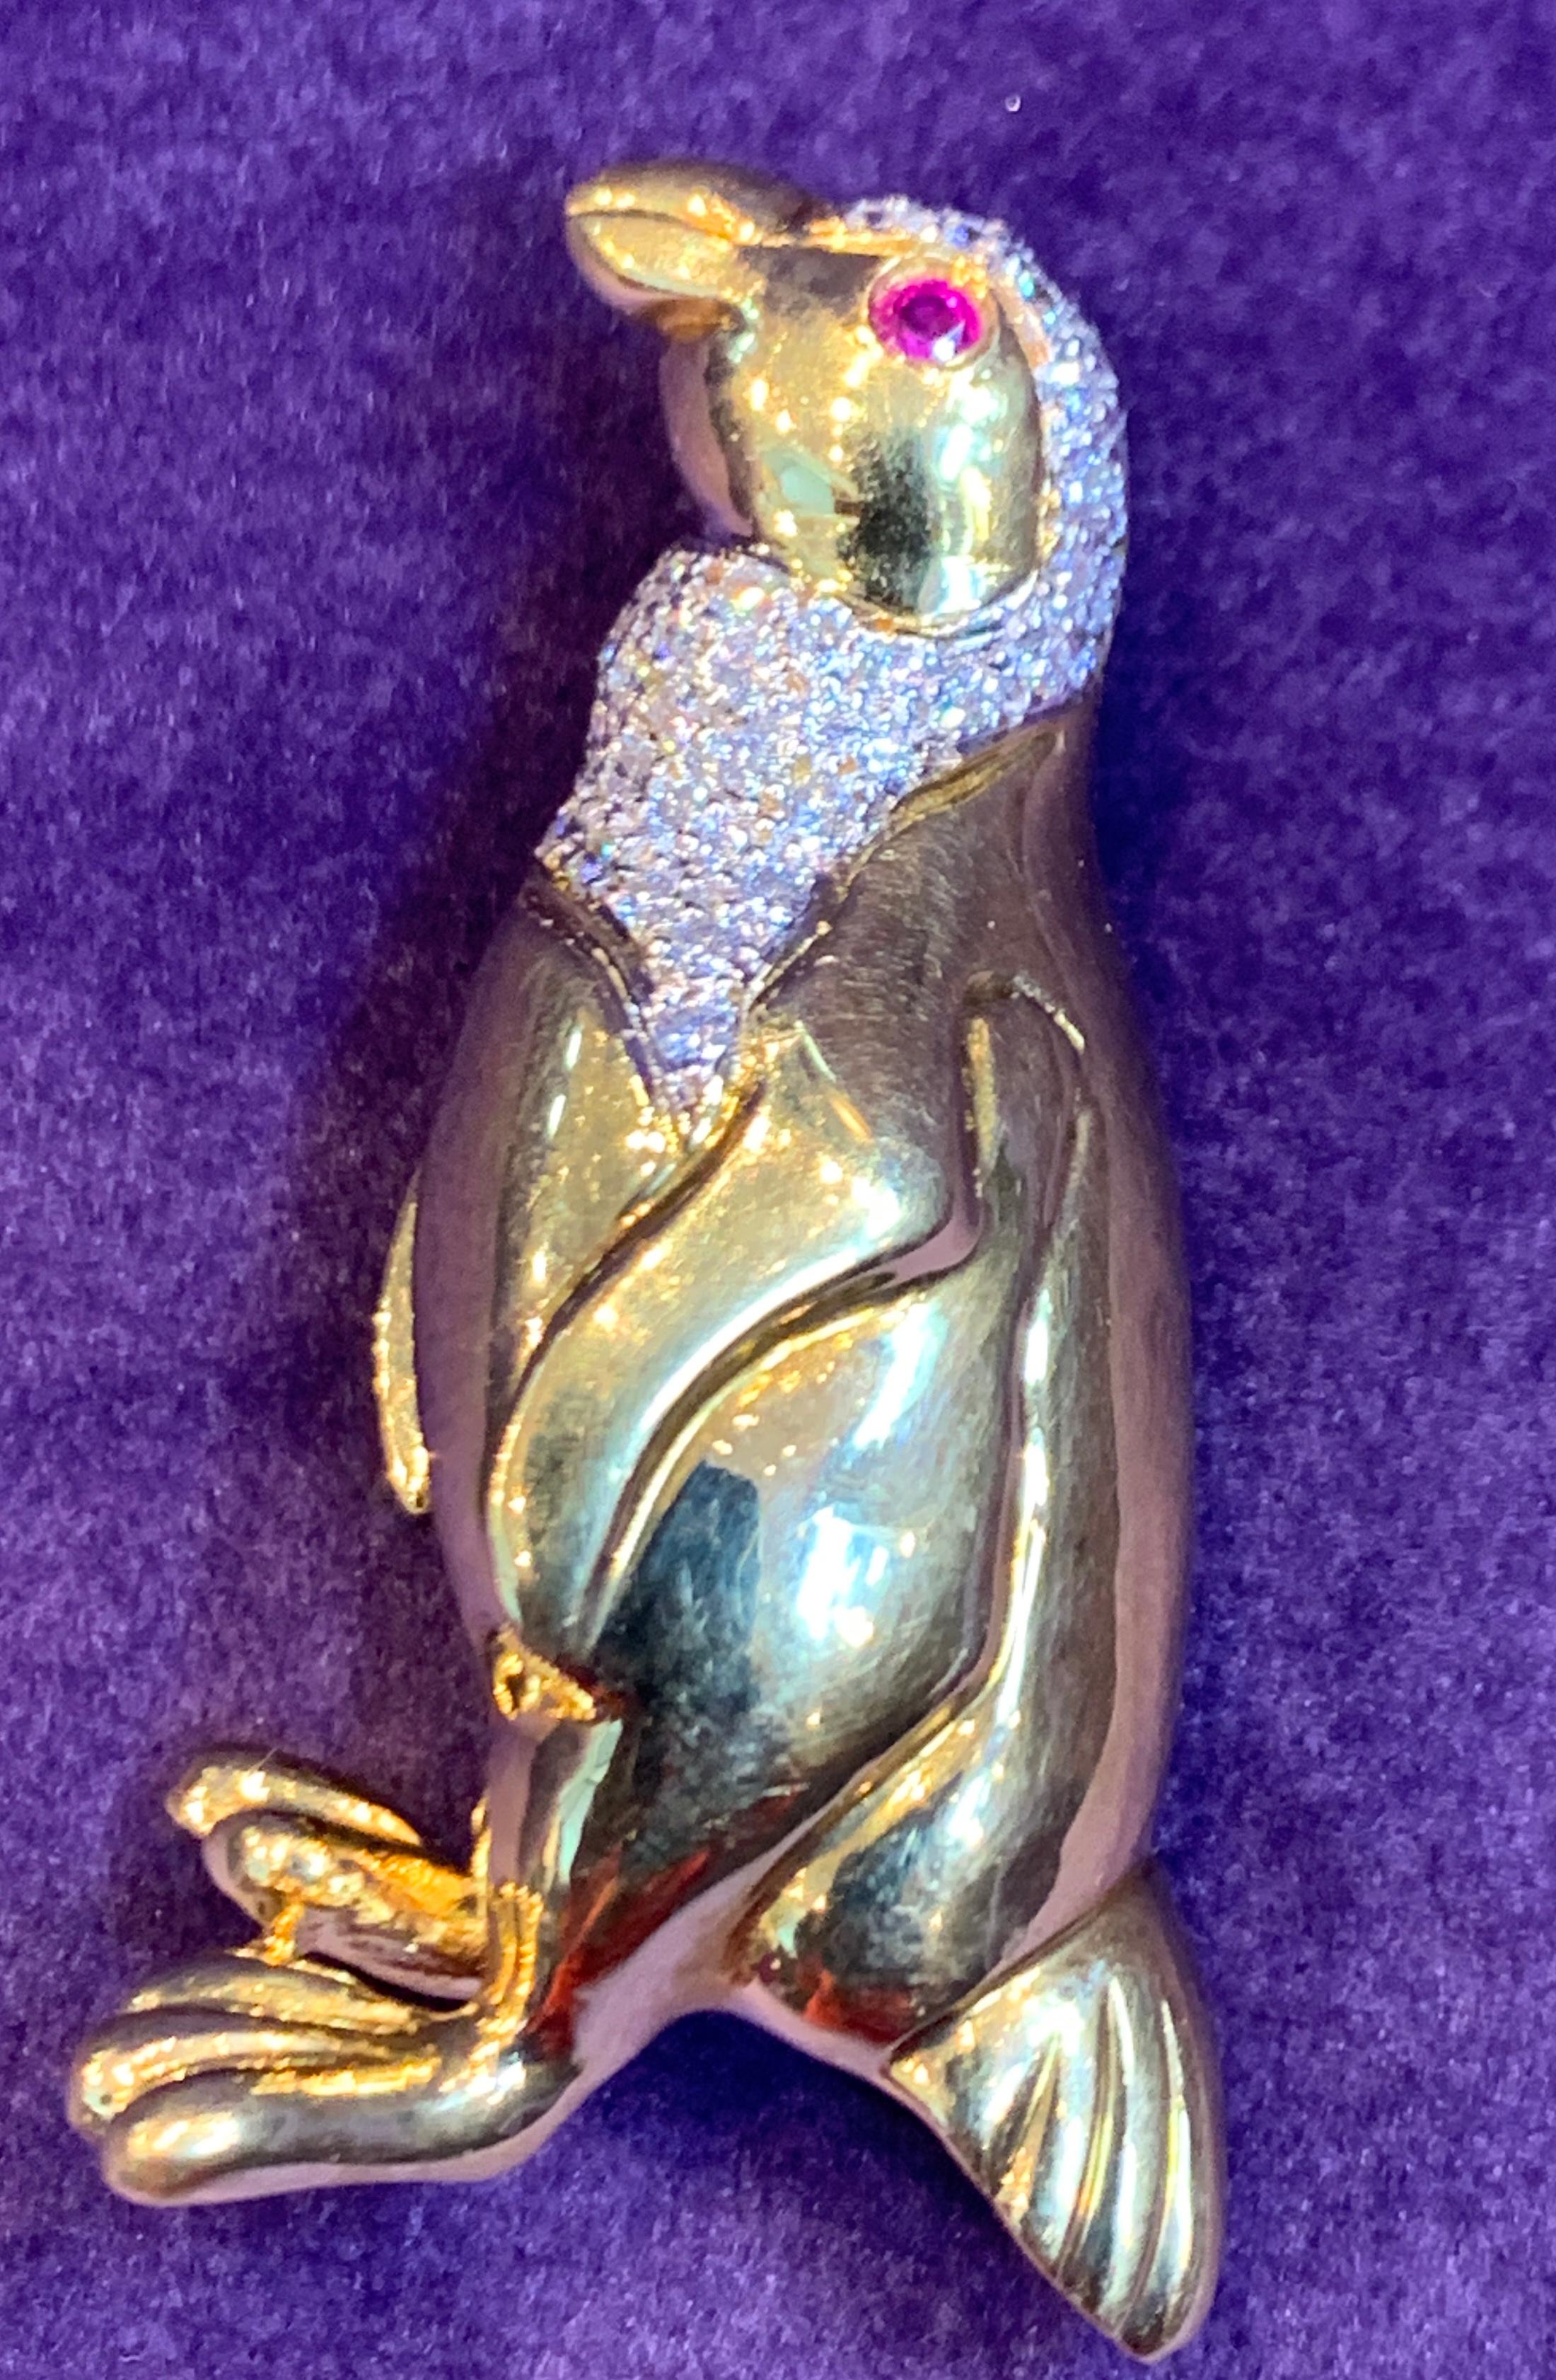 Diamond & Ruby Penguin Brooch
Made by elan 1980's
18K Yellow Gold
Diamond Weight: .78 Cts
18.5 Grams